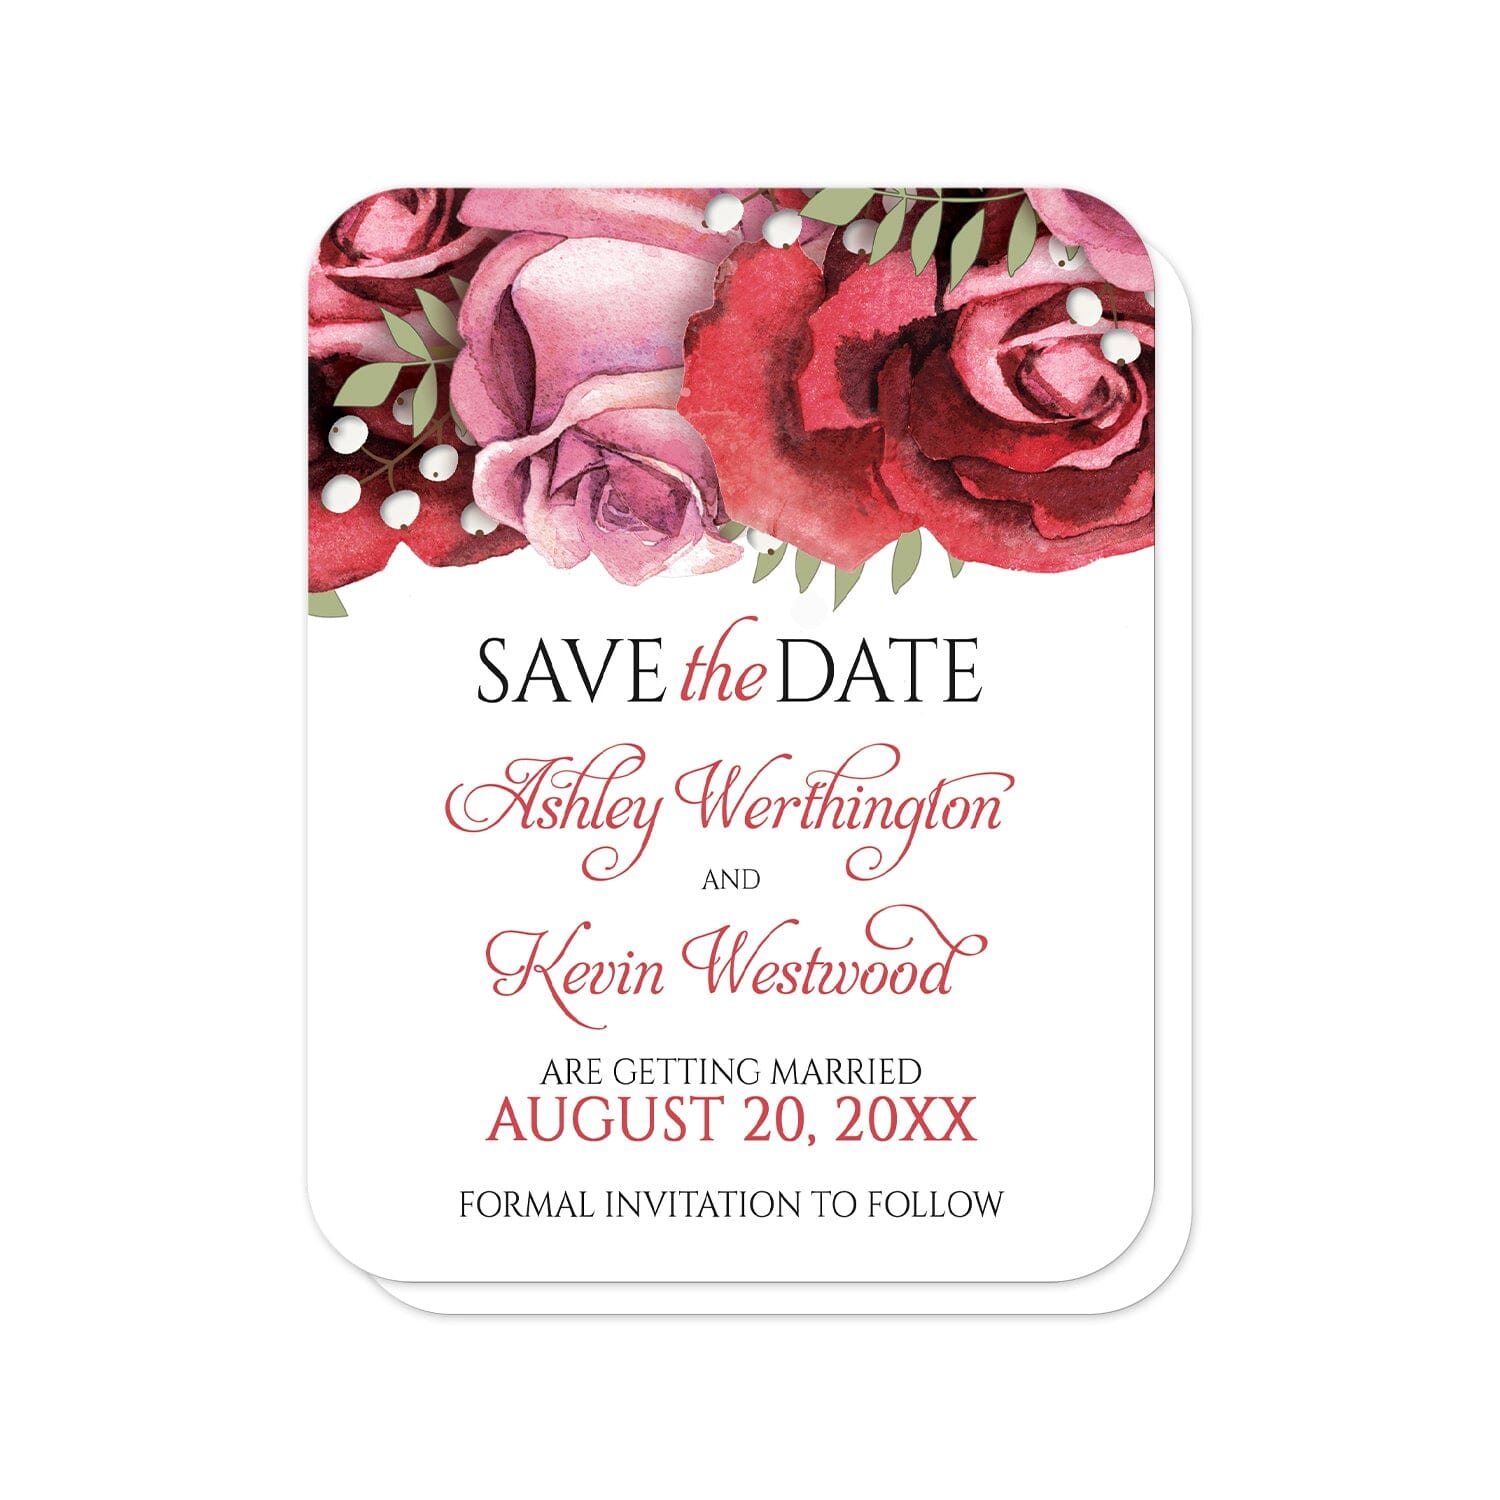 Burgundy Red Pink Rose Save the Date Cards (with rounded corners) at Artistically Invited. Beautiful burgundy red pink rose save the date cards with beautiful burgundy red and pink roses along the top over a white background. Your personalized wedding date details are custom printed in black and red below the pretty roses. 